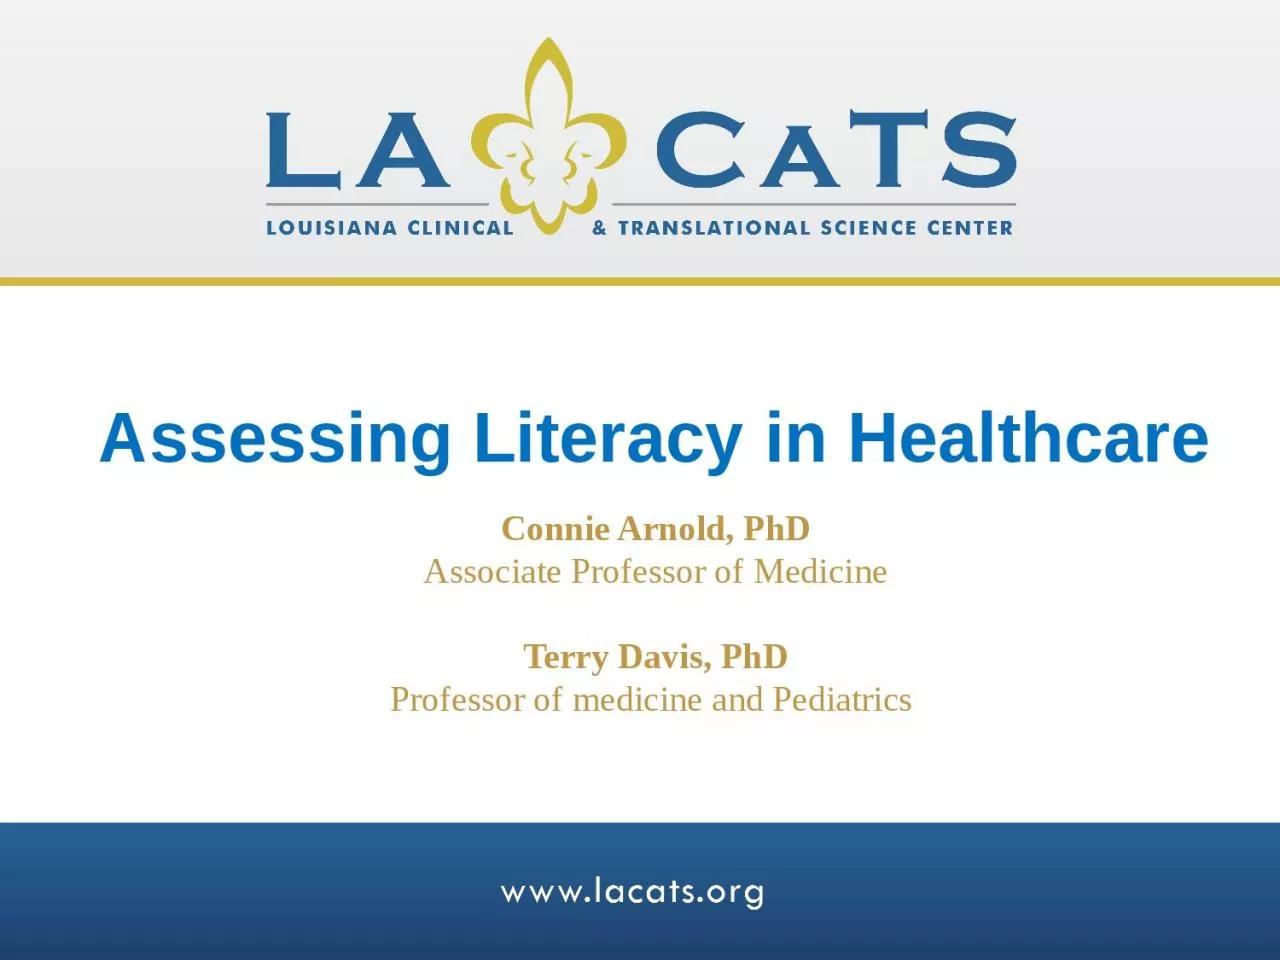 Assessing Literacy in Healthcare